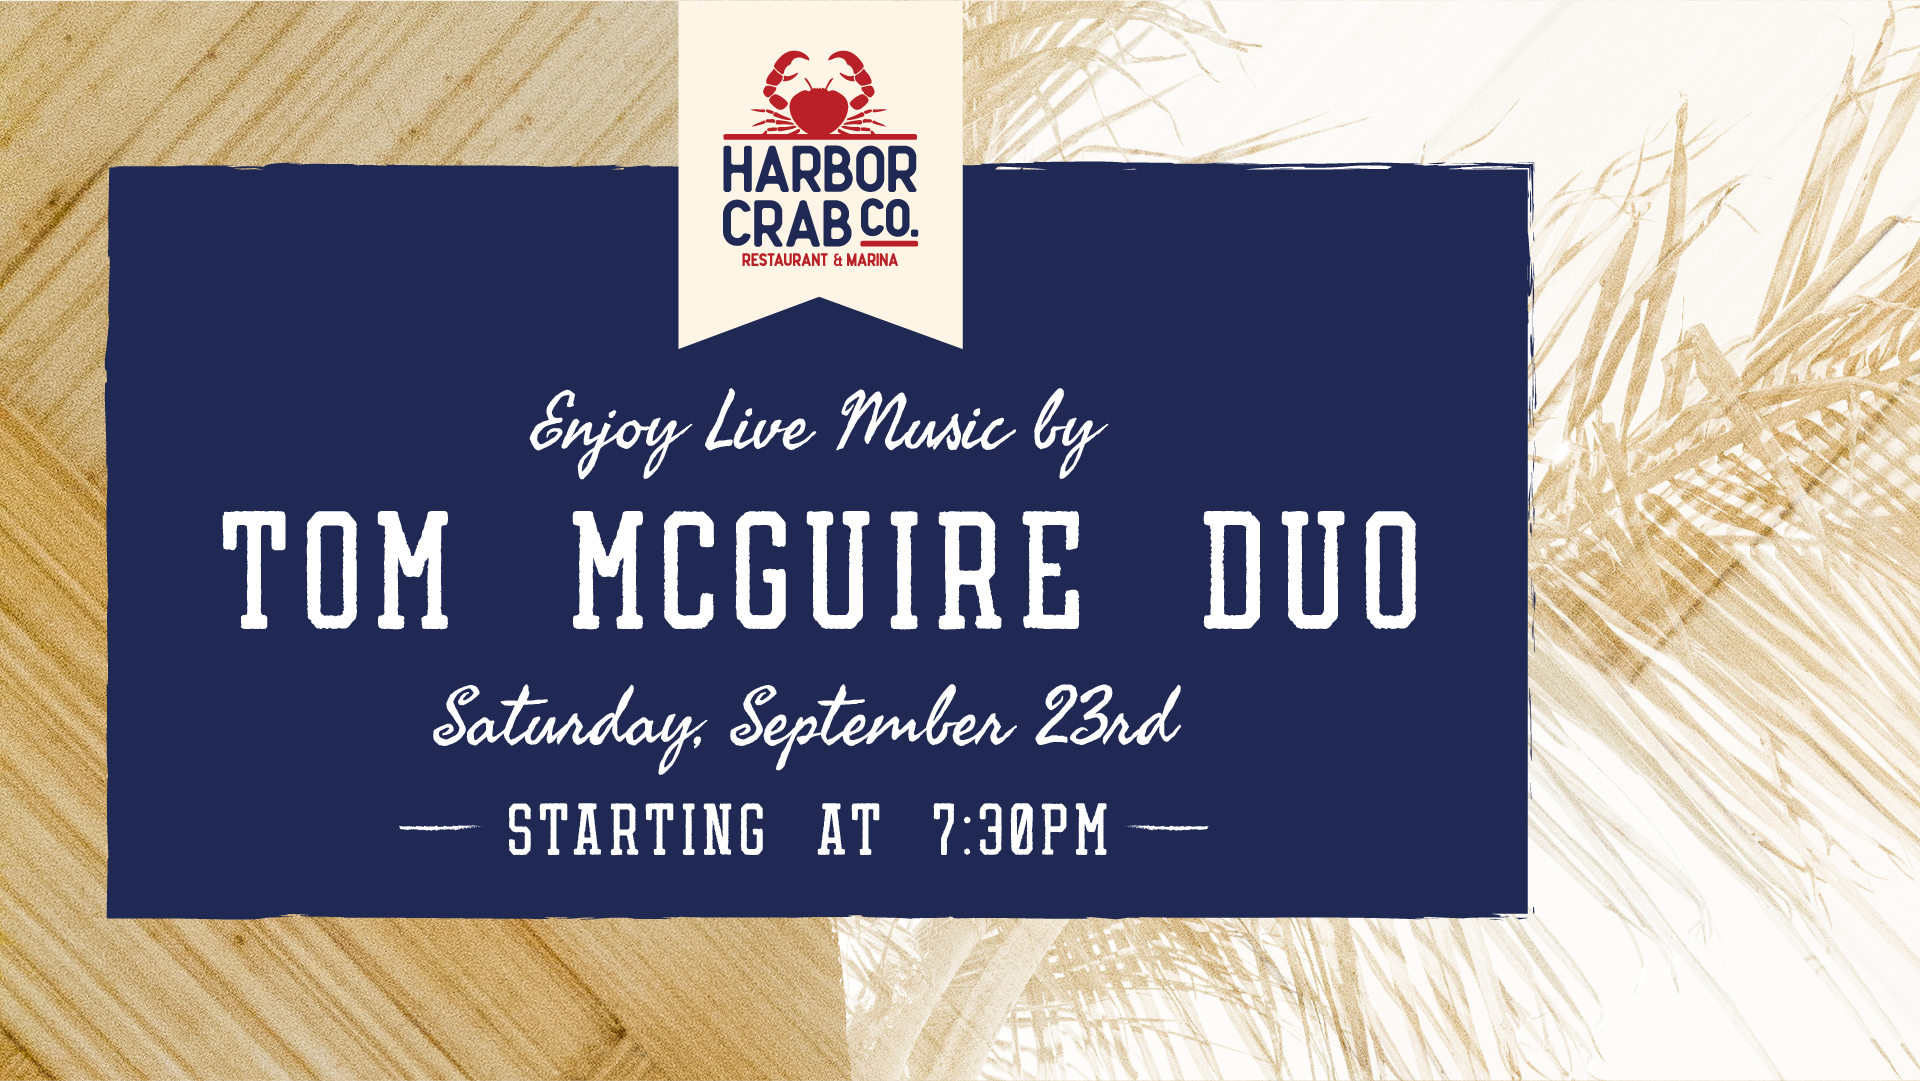 Live Music with Tom McGuire Duo on Saturday, September 23rd at 7:30pm.